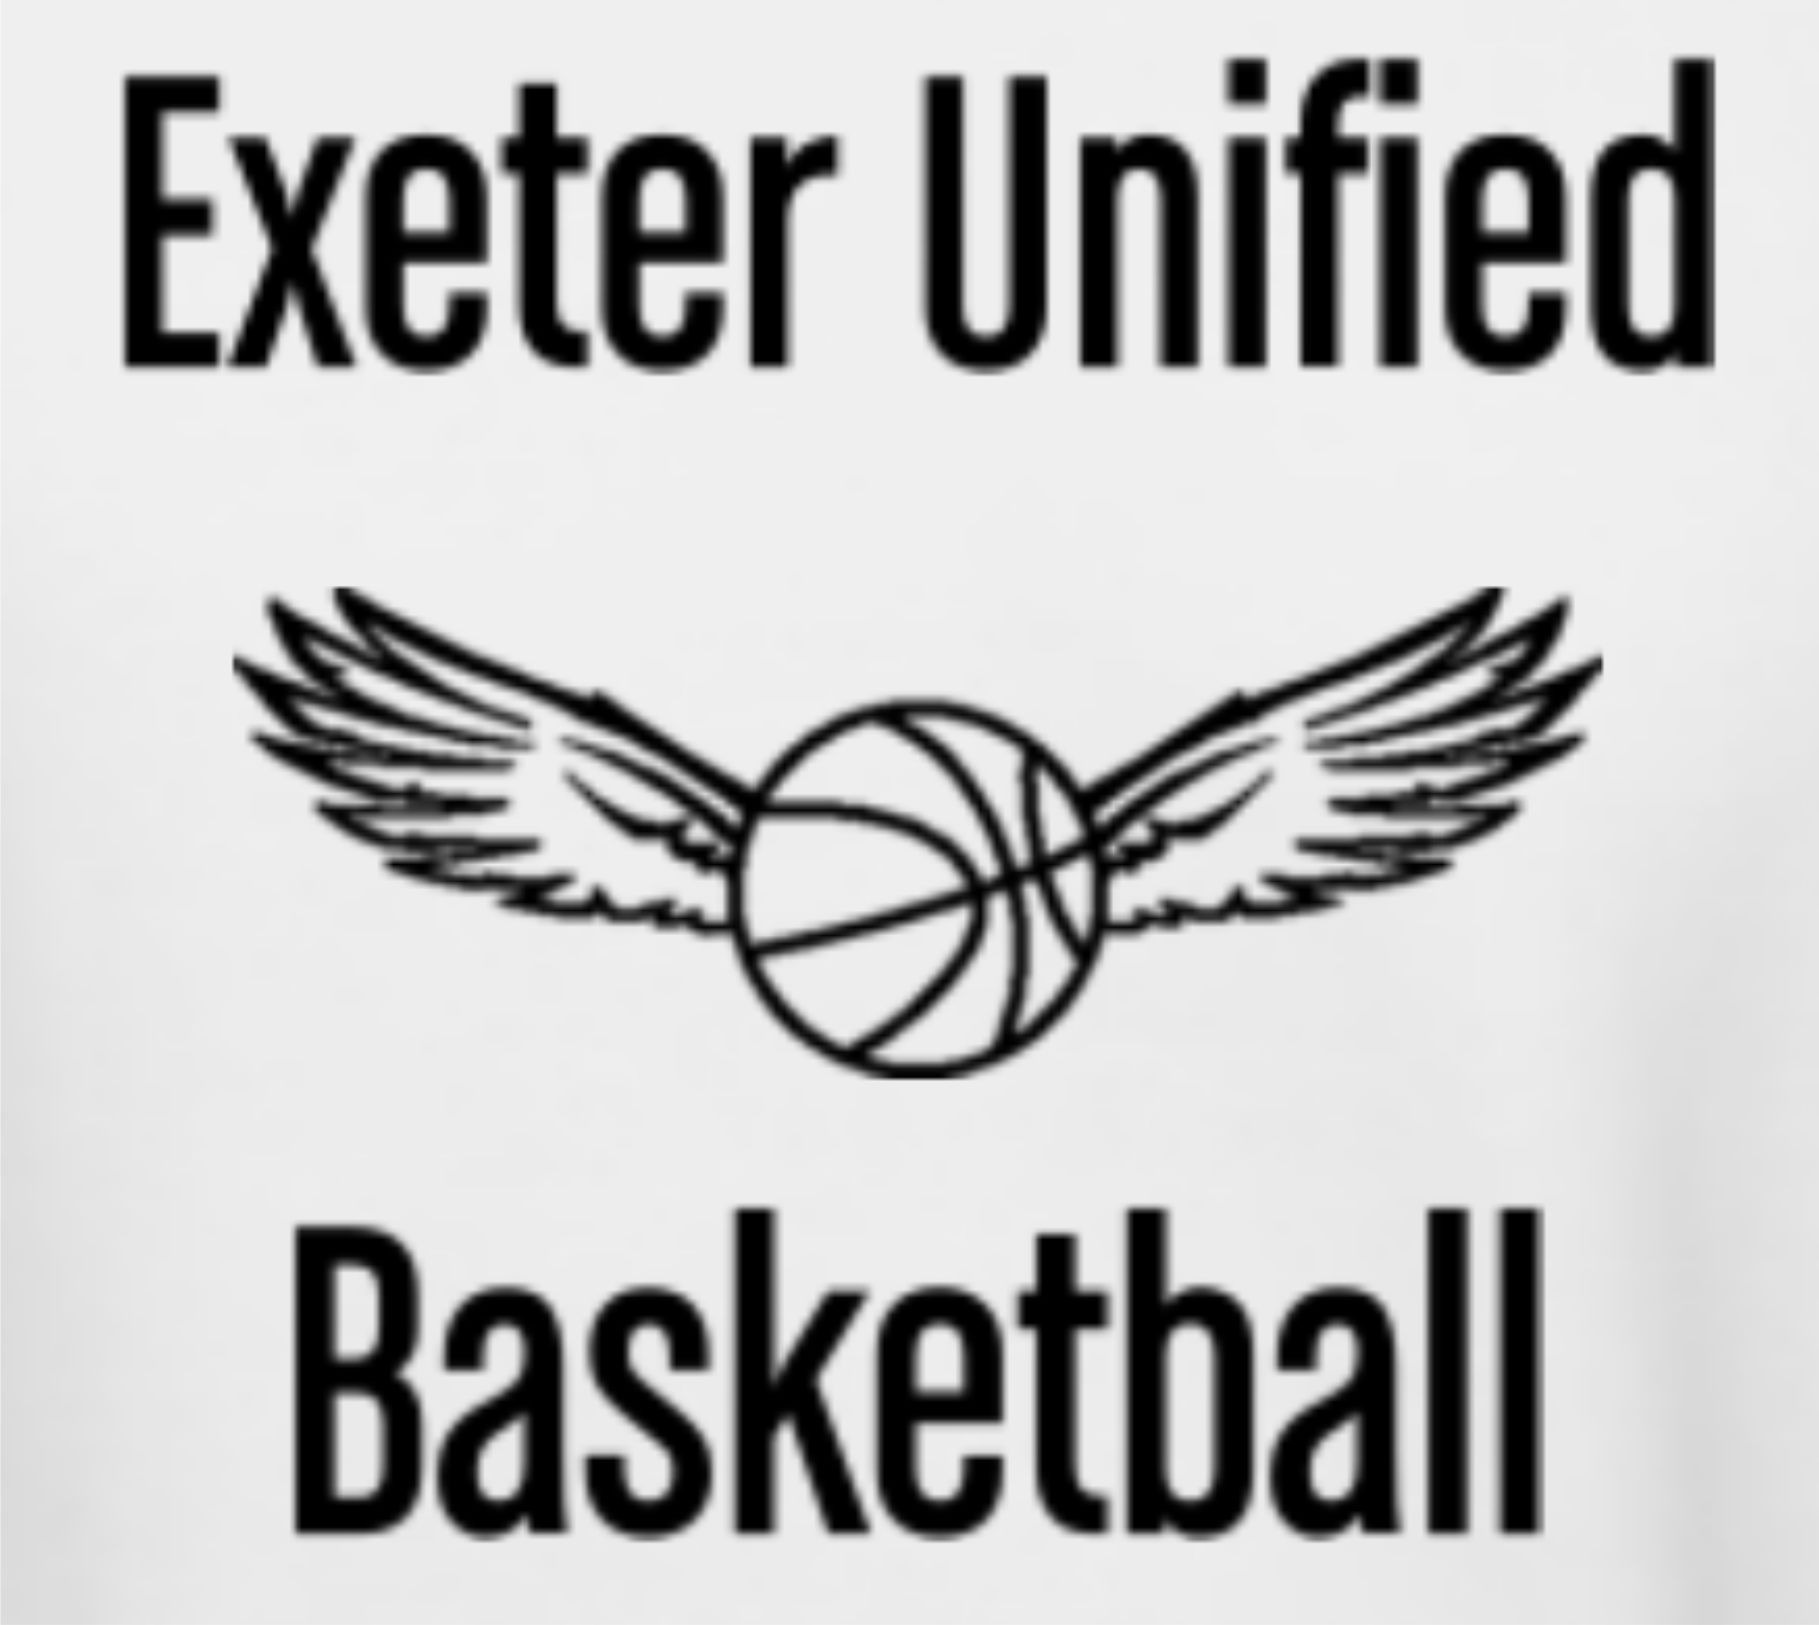 Exeter Unified